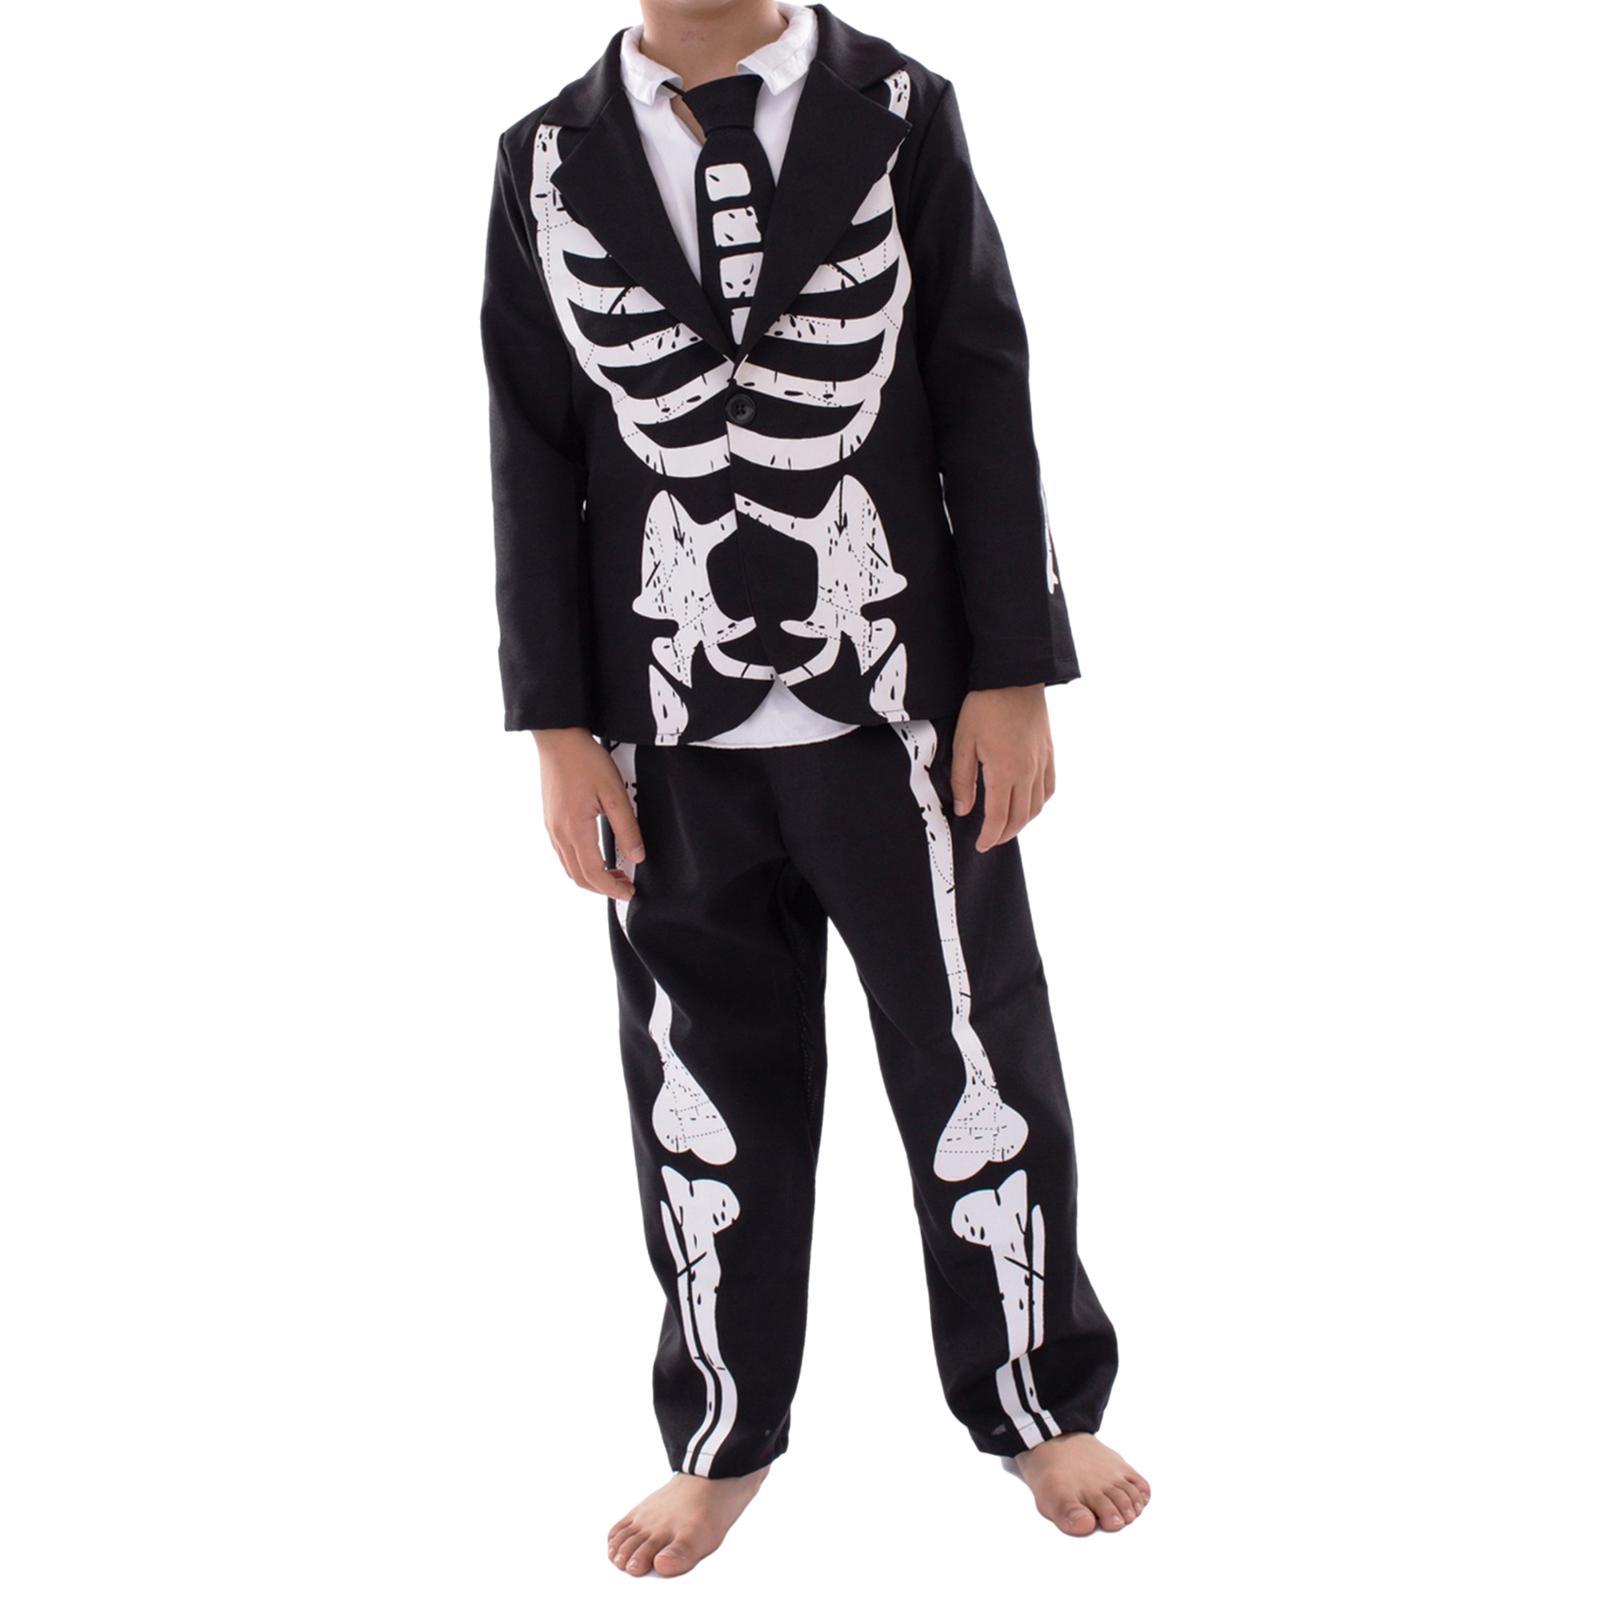 Halloween Skeleton Costume Clothes Kids Dress Suit for Role Play Party Favor